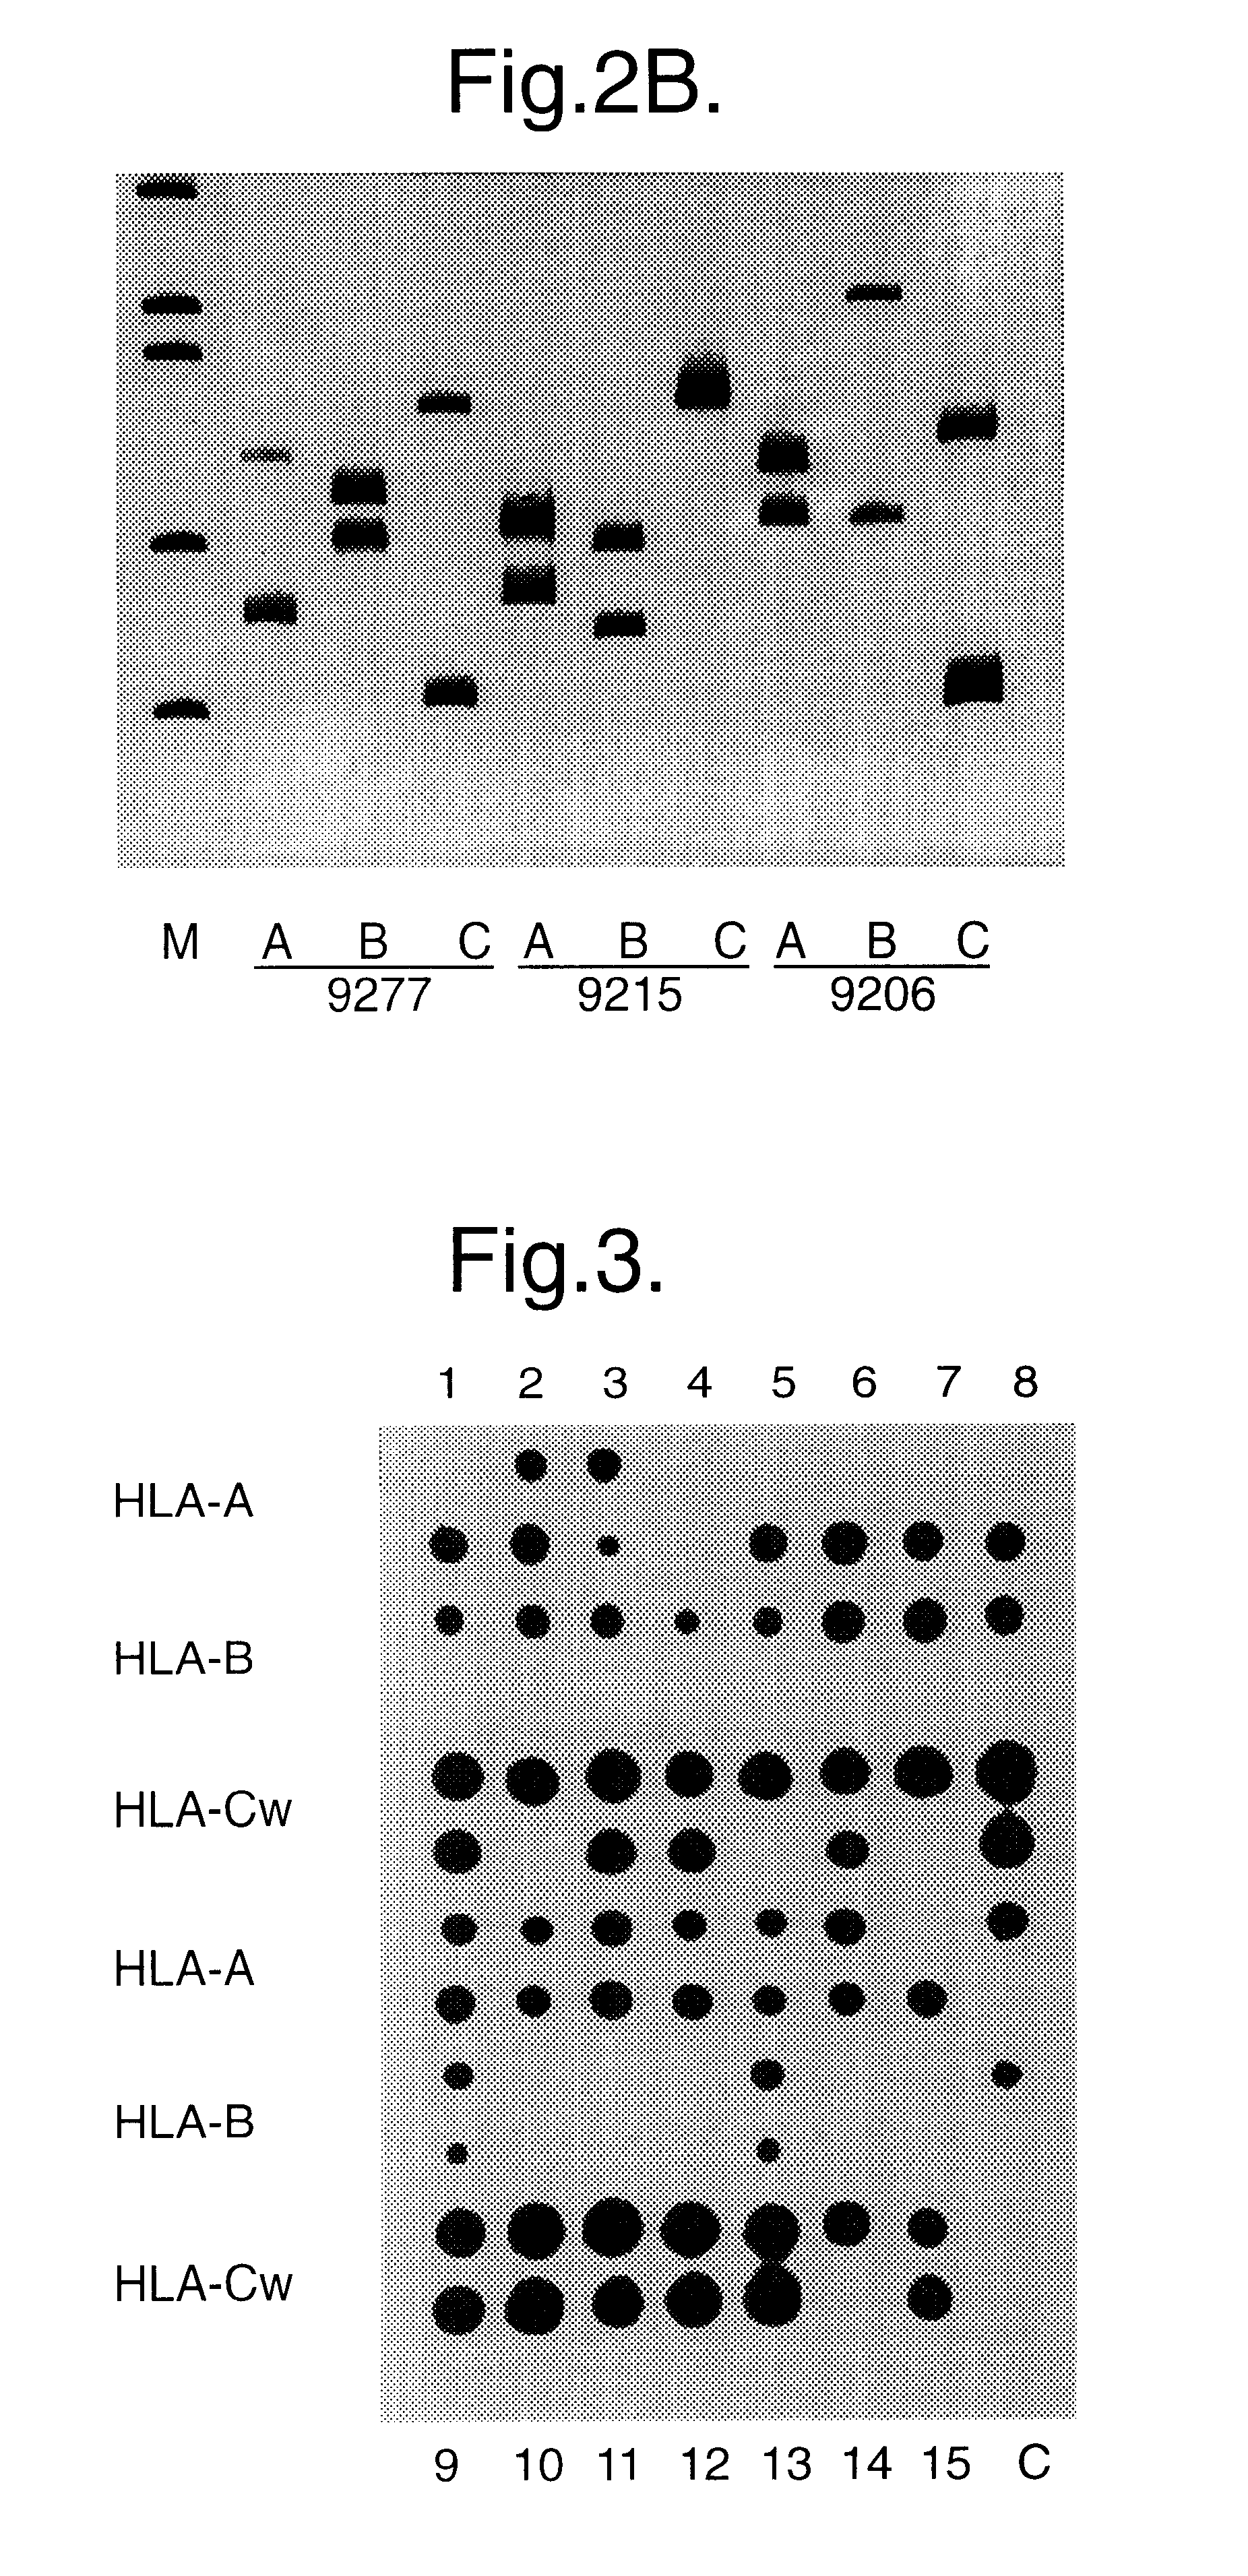 Method for identifying an unknown allele